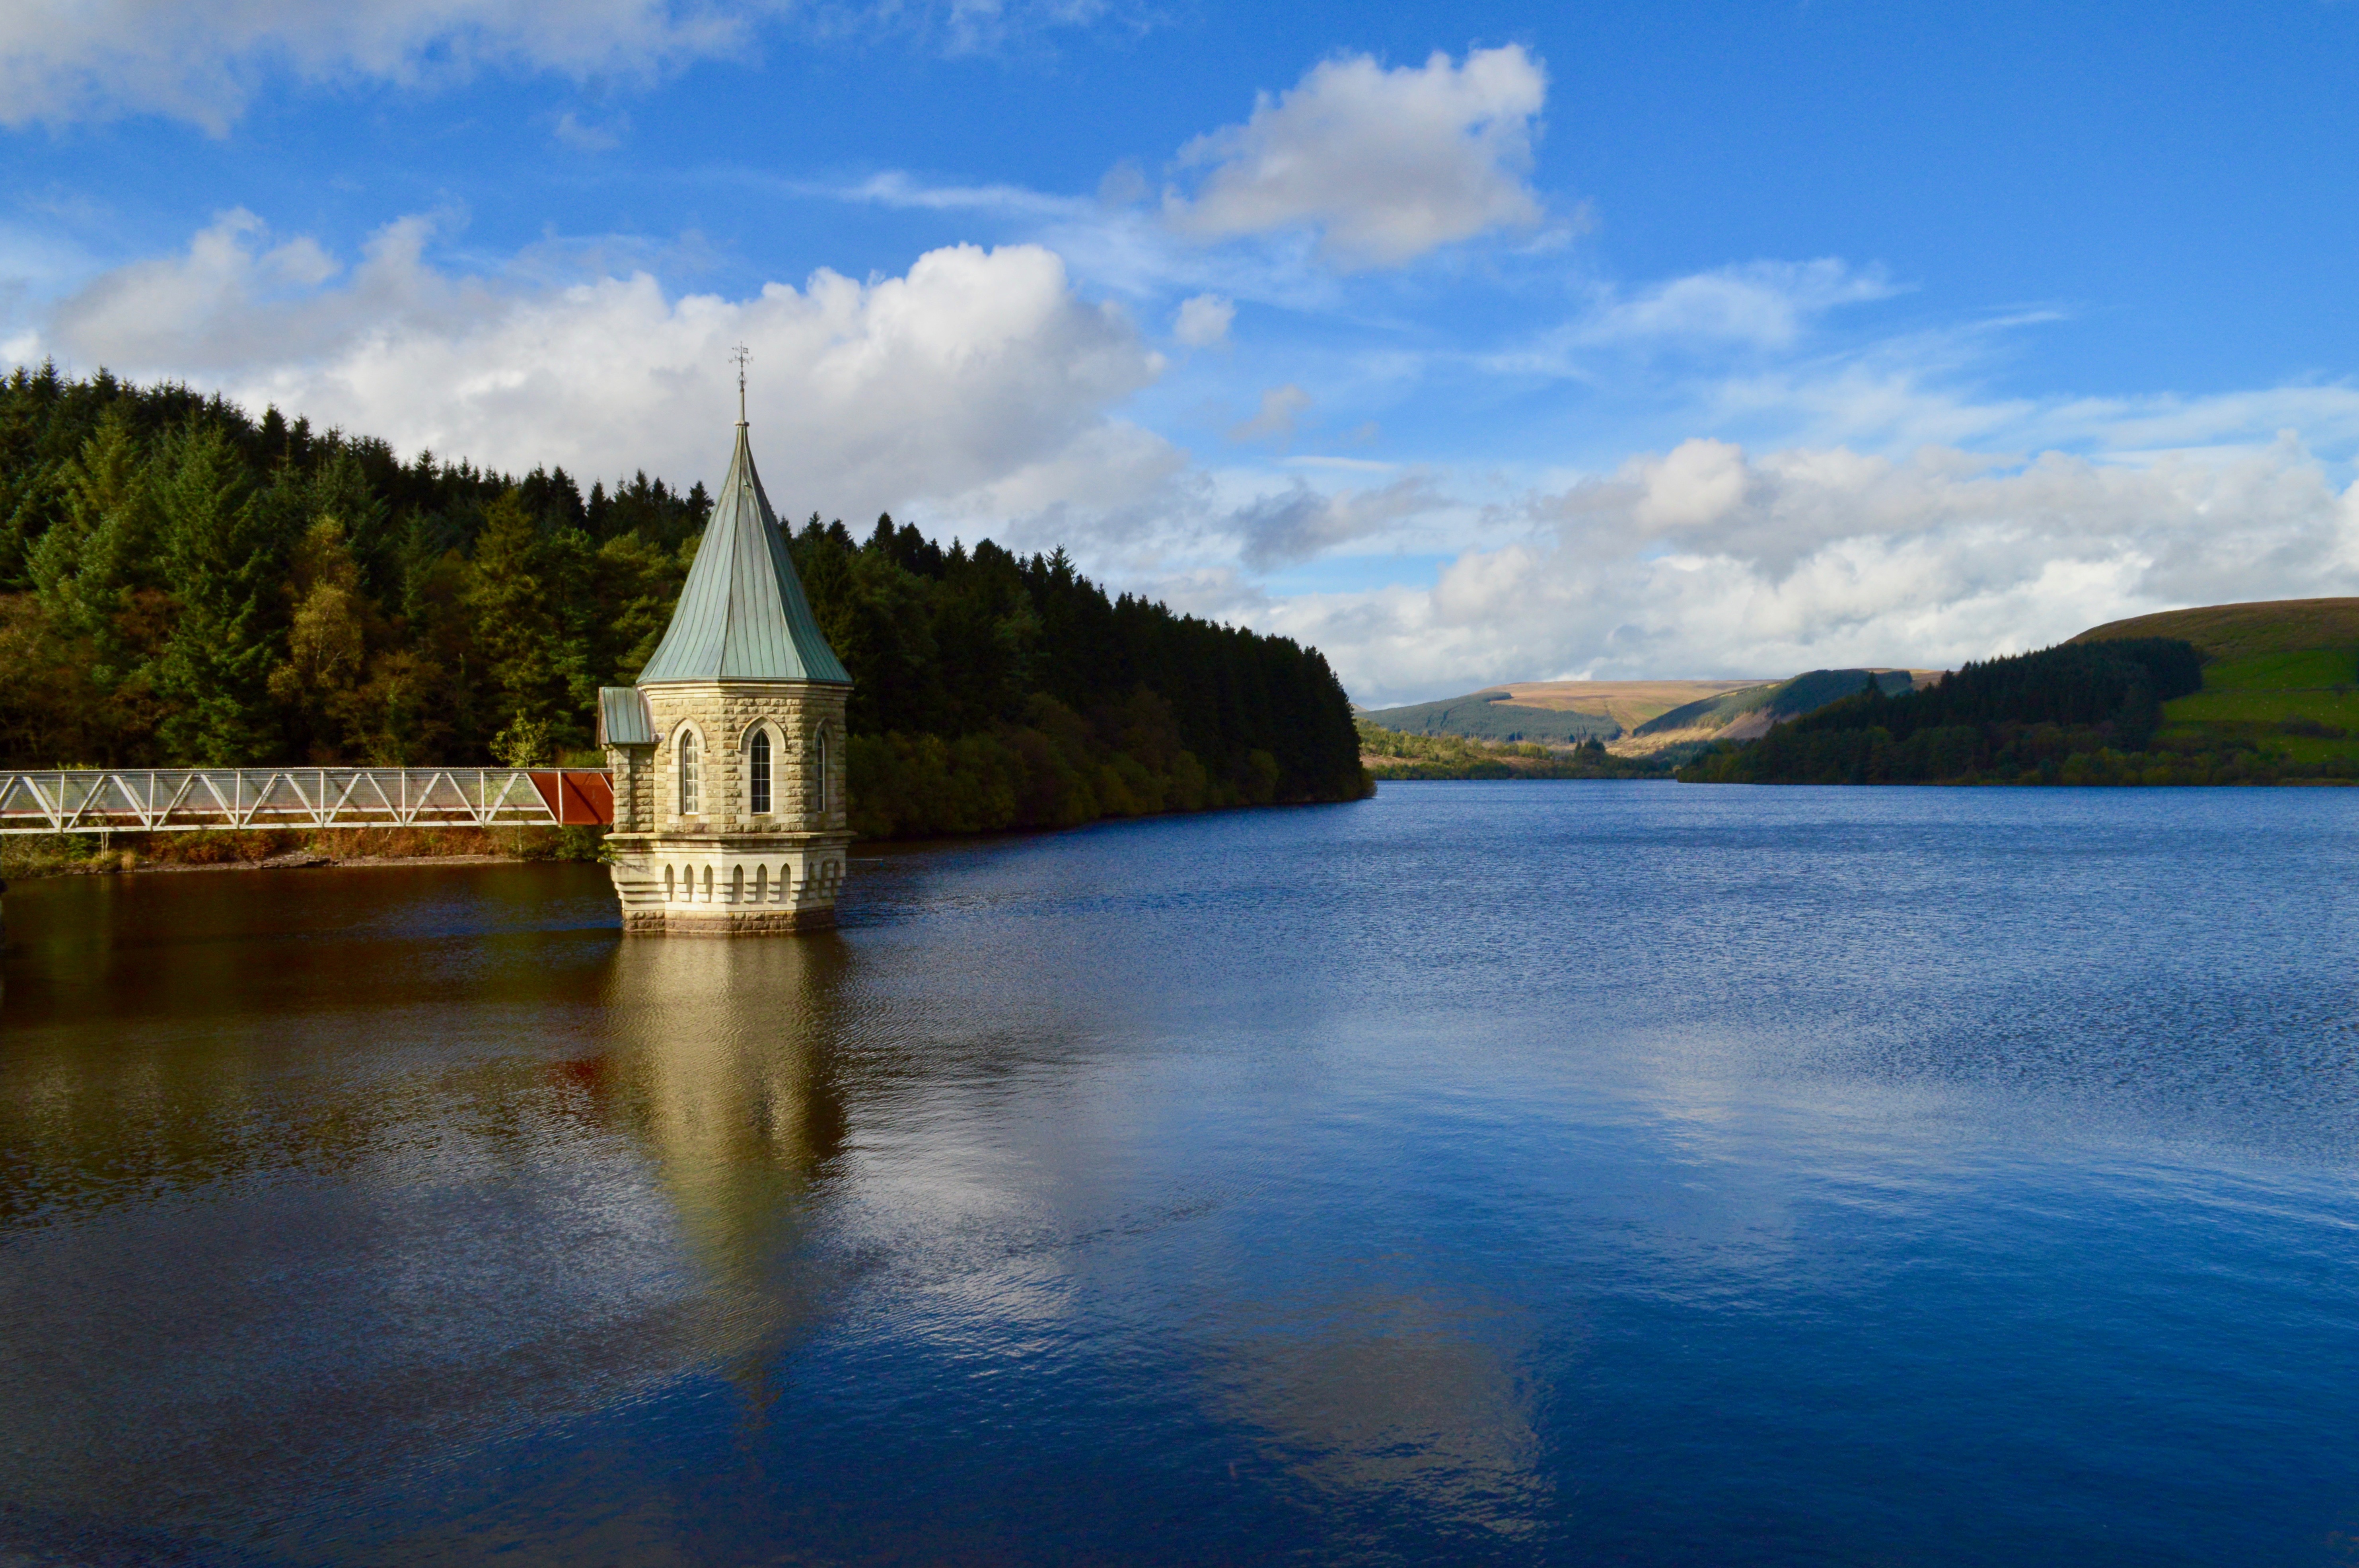 Reservoirs & Steam Trains In The Beacons